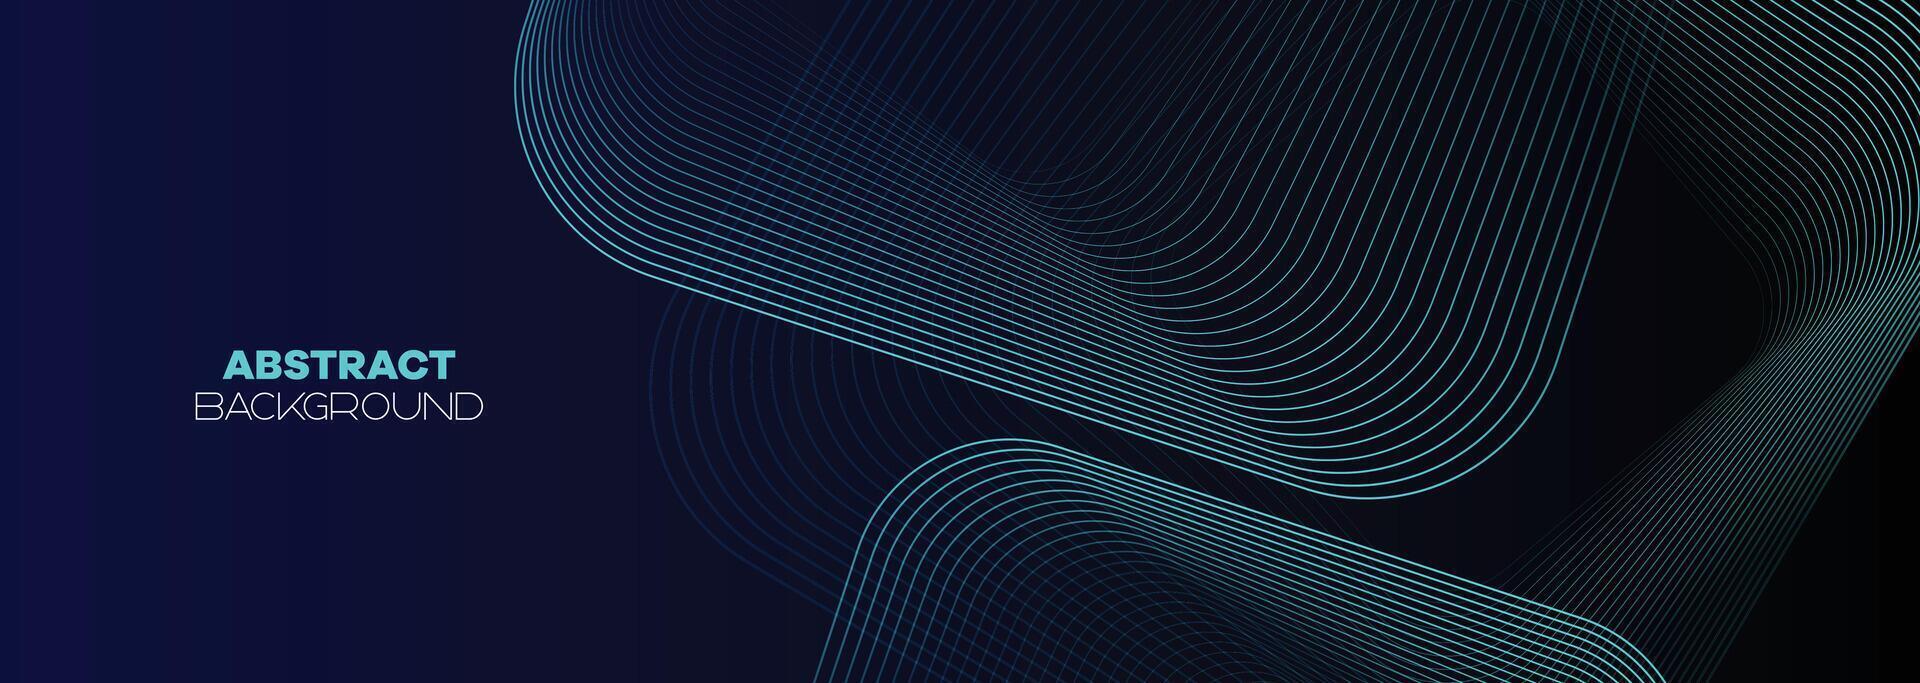 Dark blue, Green abstract banner background with glowing geometric lines. Navy blue gradient shiny lines pattern Futuristic technology web background for Science, cover, website, header, brochure vector